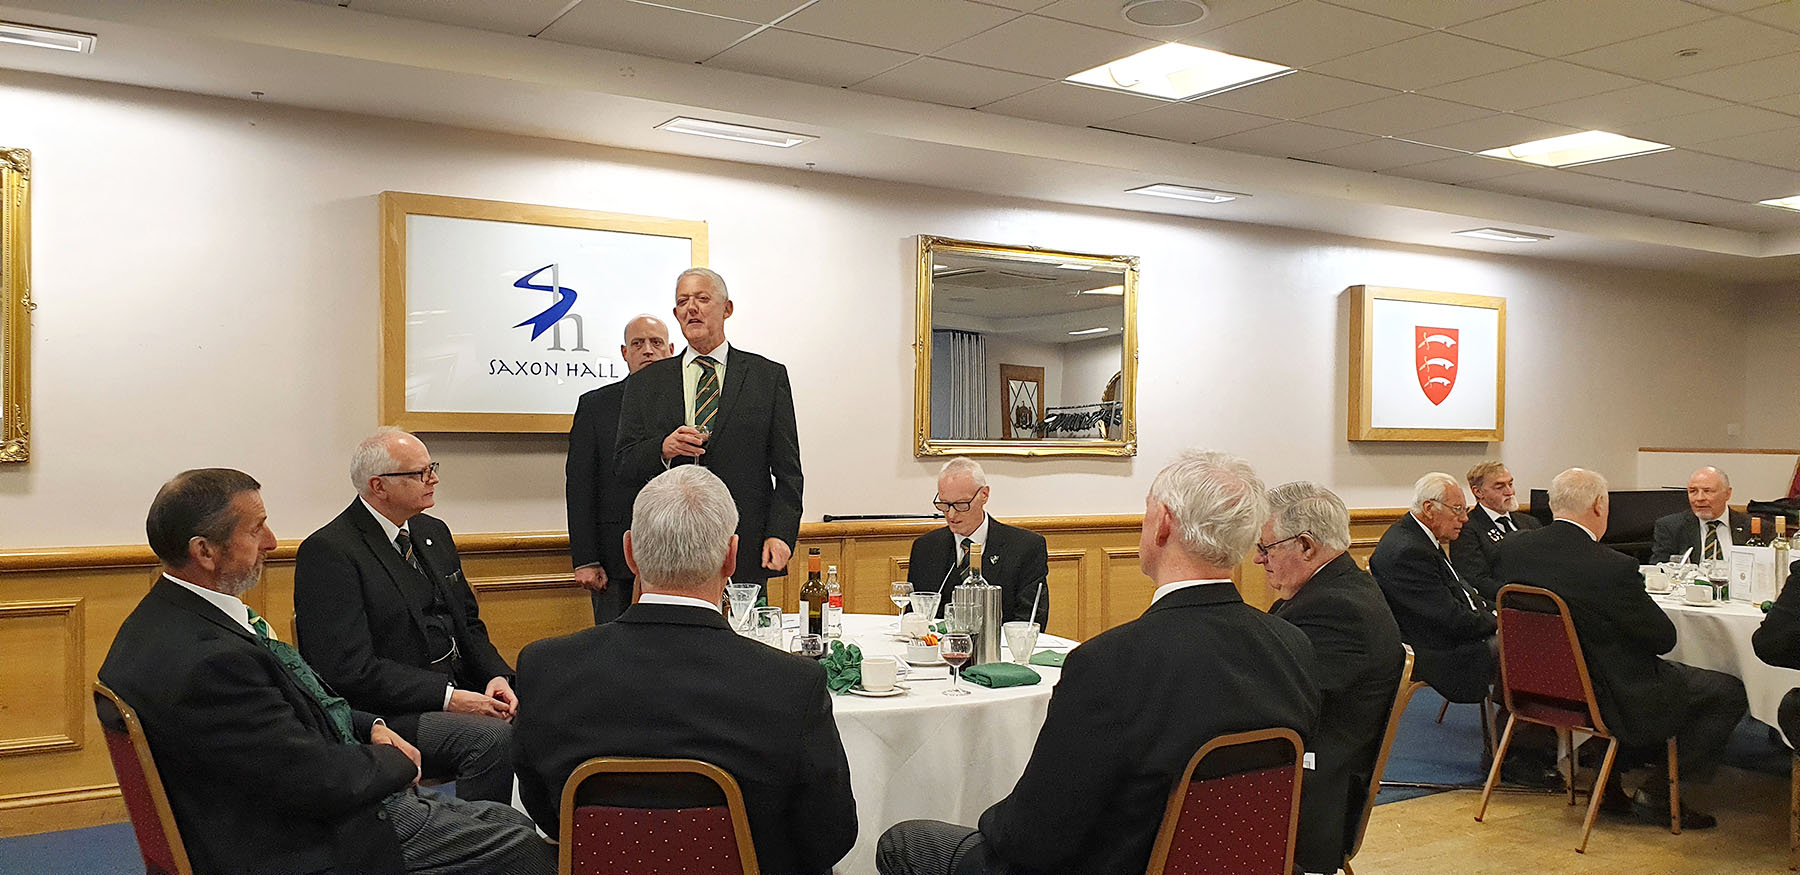 Members from the AMD of Kent visit the District of Essex for their Annual Meeting